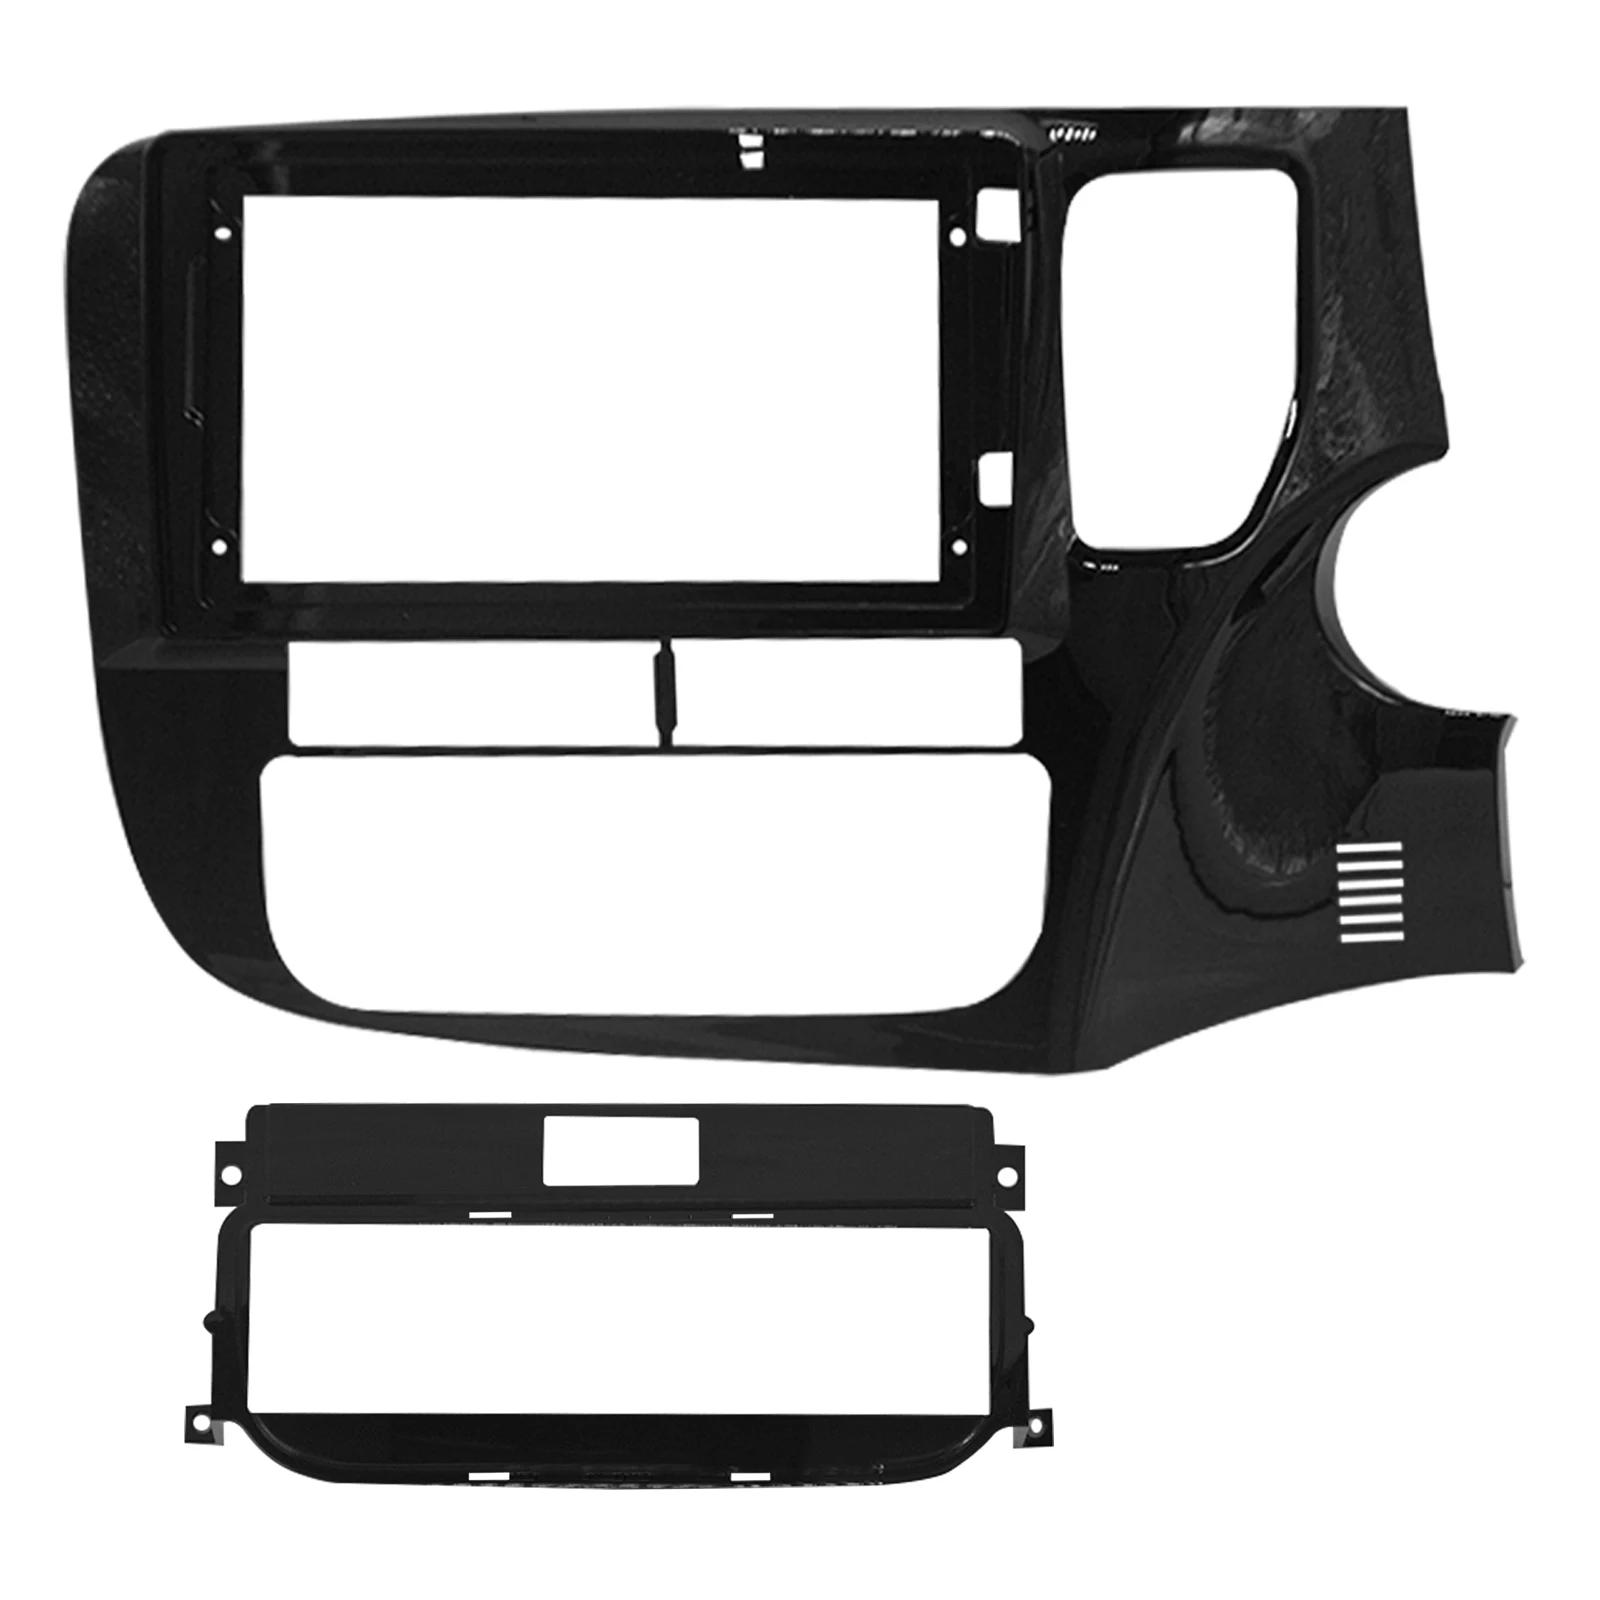 

BYNCG 2 DIN Car Frame Fascia Adapter Canbus Box For Mitsubishi Outlander 2013-2021 Android Radio Dask Kit